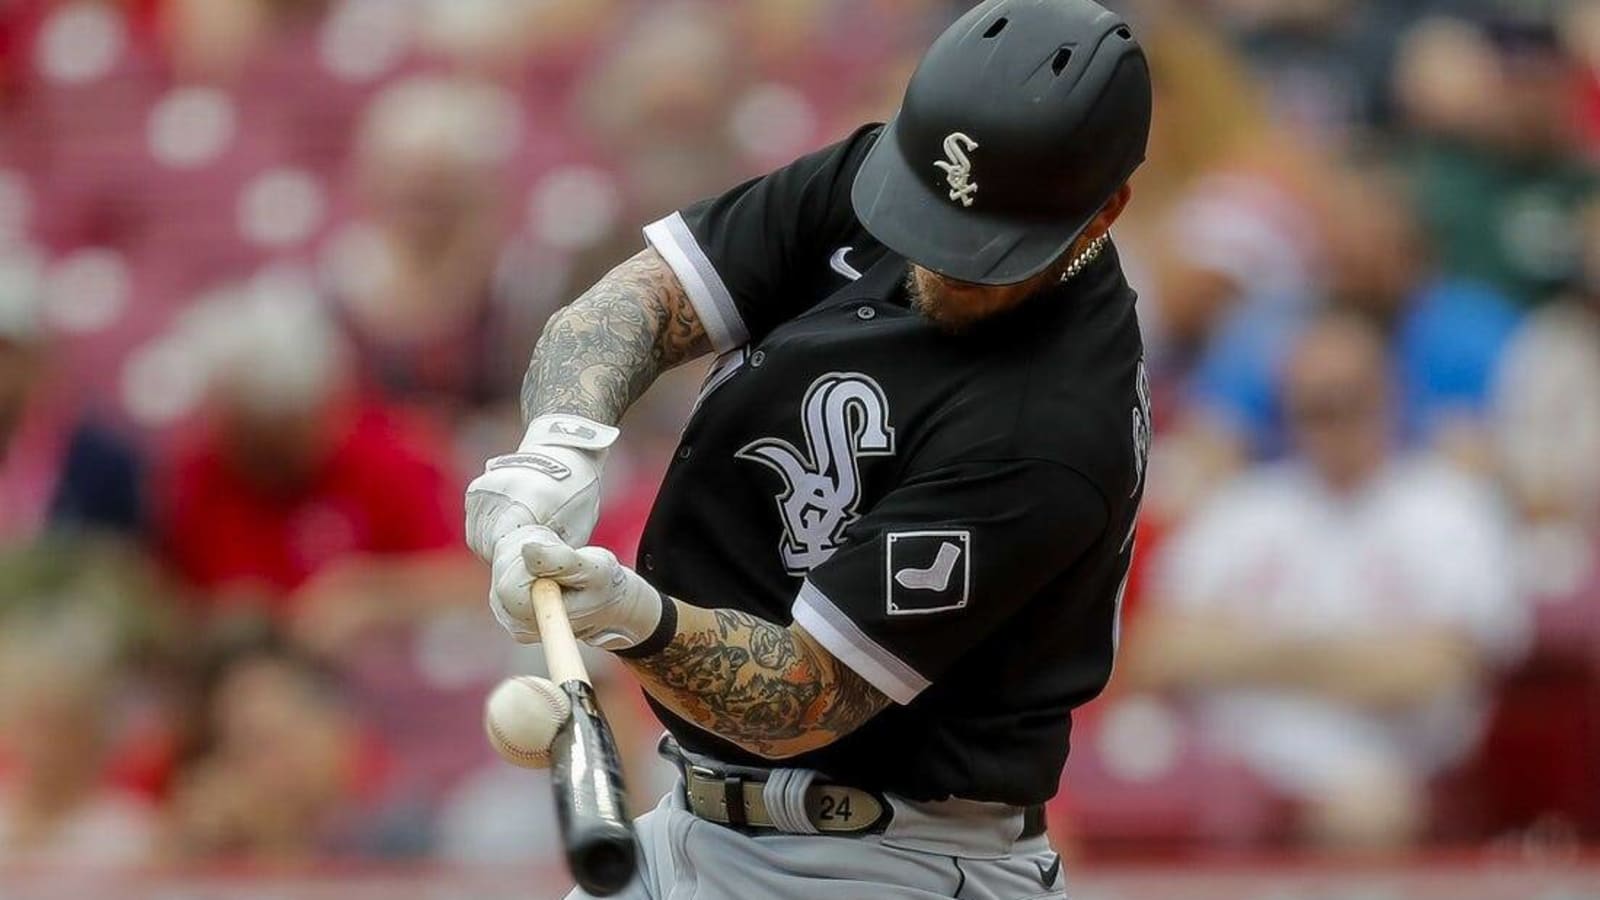 White Sox score 11 in 2nd inning, go on to dominate Reds